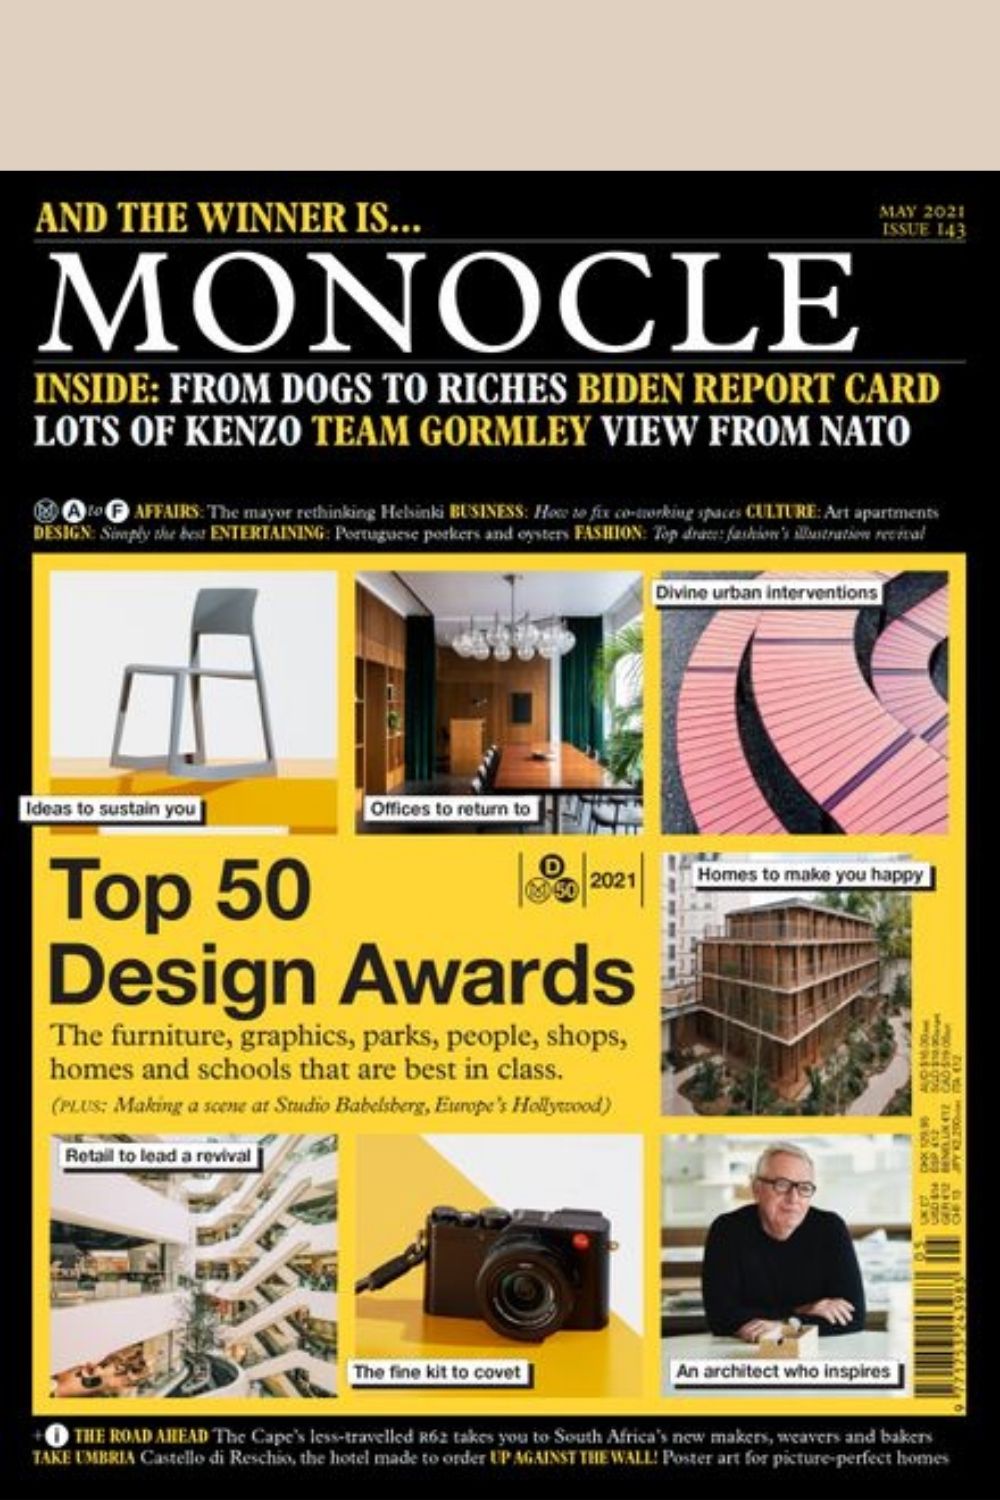 Front cover of Monocle magazine Issue 143